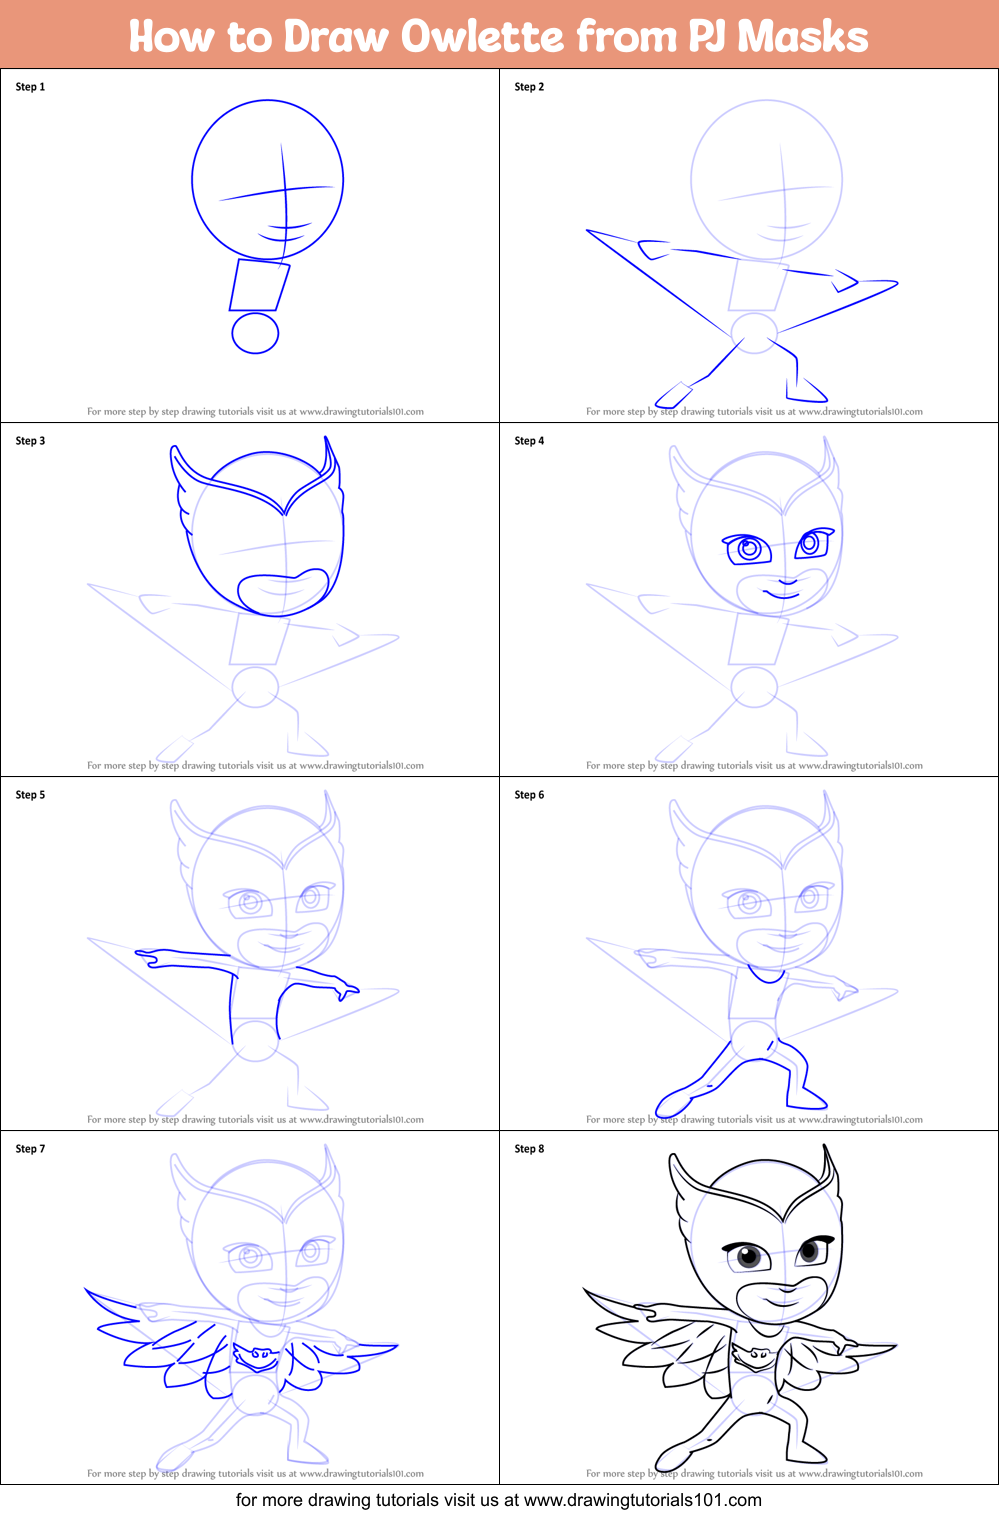 How To Draw Owlette.